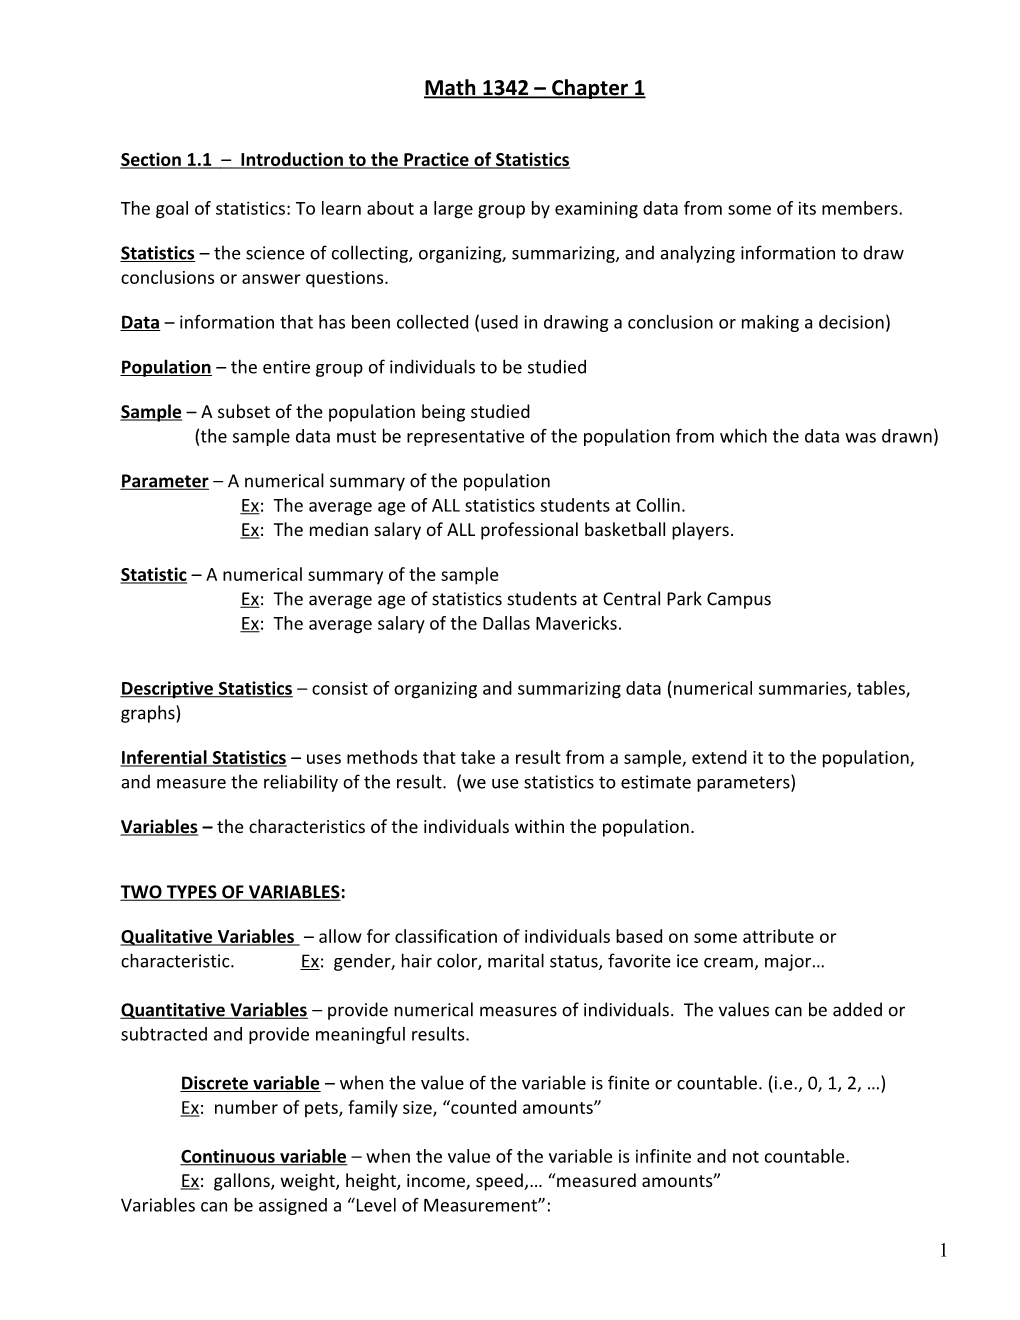 Section 1.1 Introduction to the Practice of Statistics